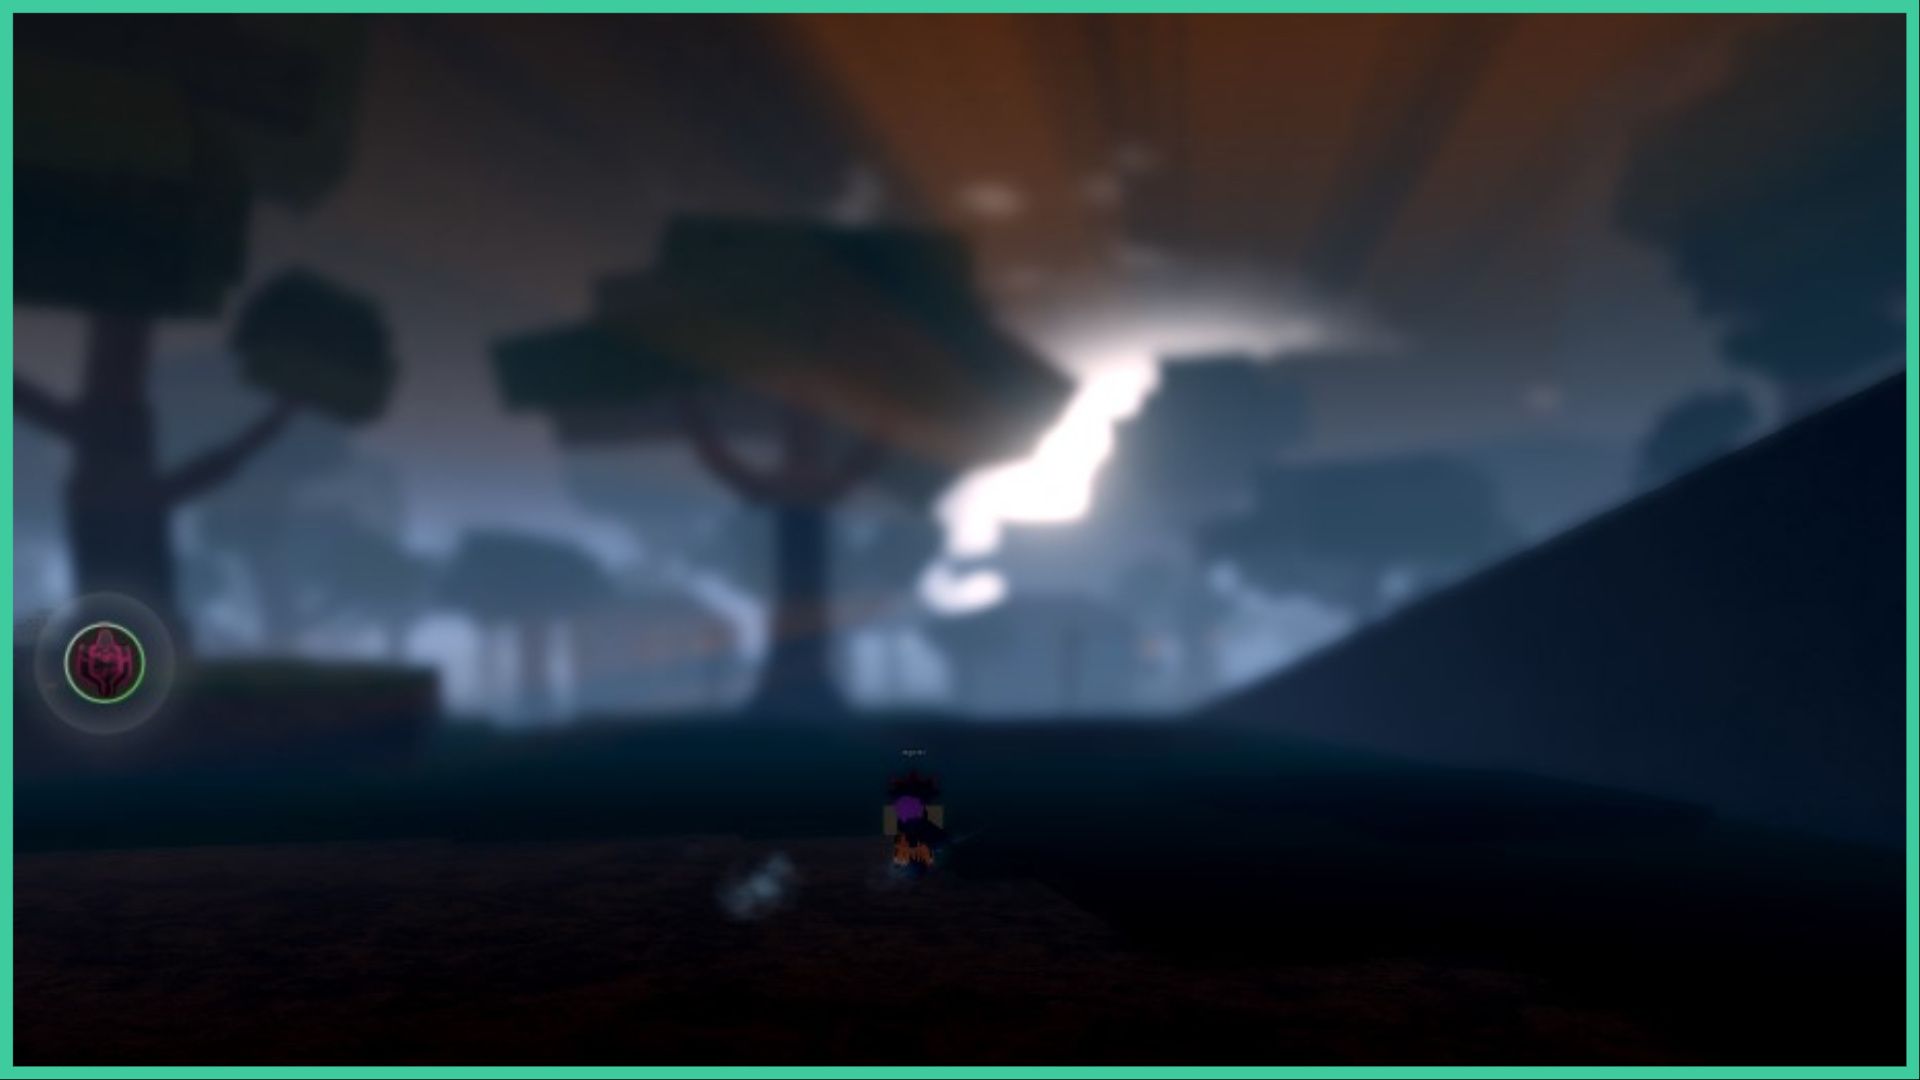 feature image for our project mugetsu shikai guide, it's a screenshot of the sunset as the beams of light shine above the silhouttes of trees in the distance, and two robox characters taking part in a battle on the dirt by the grass